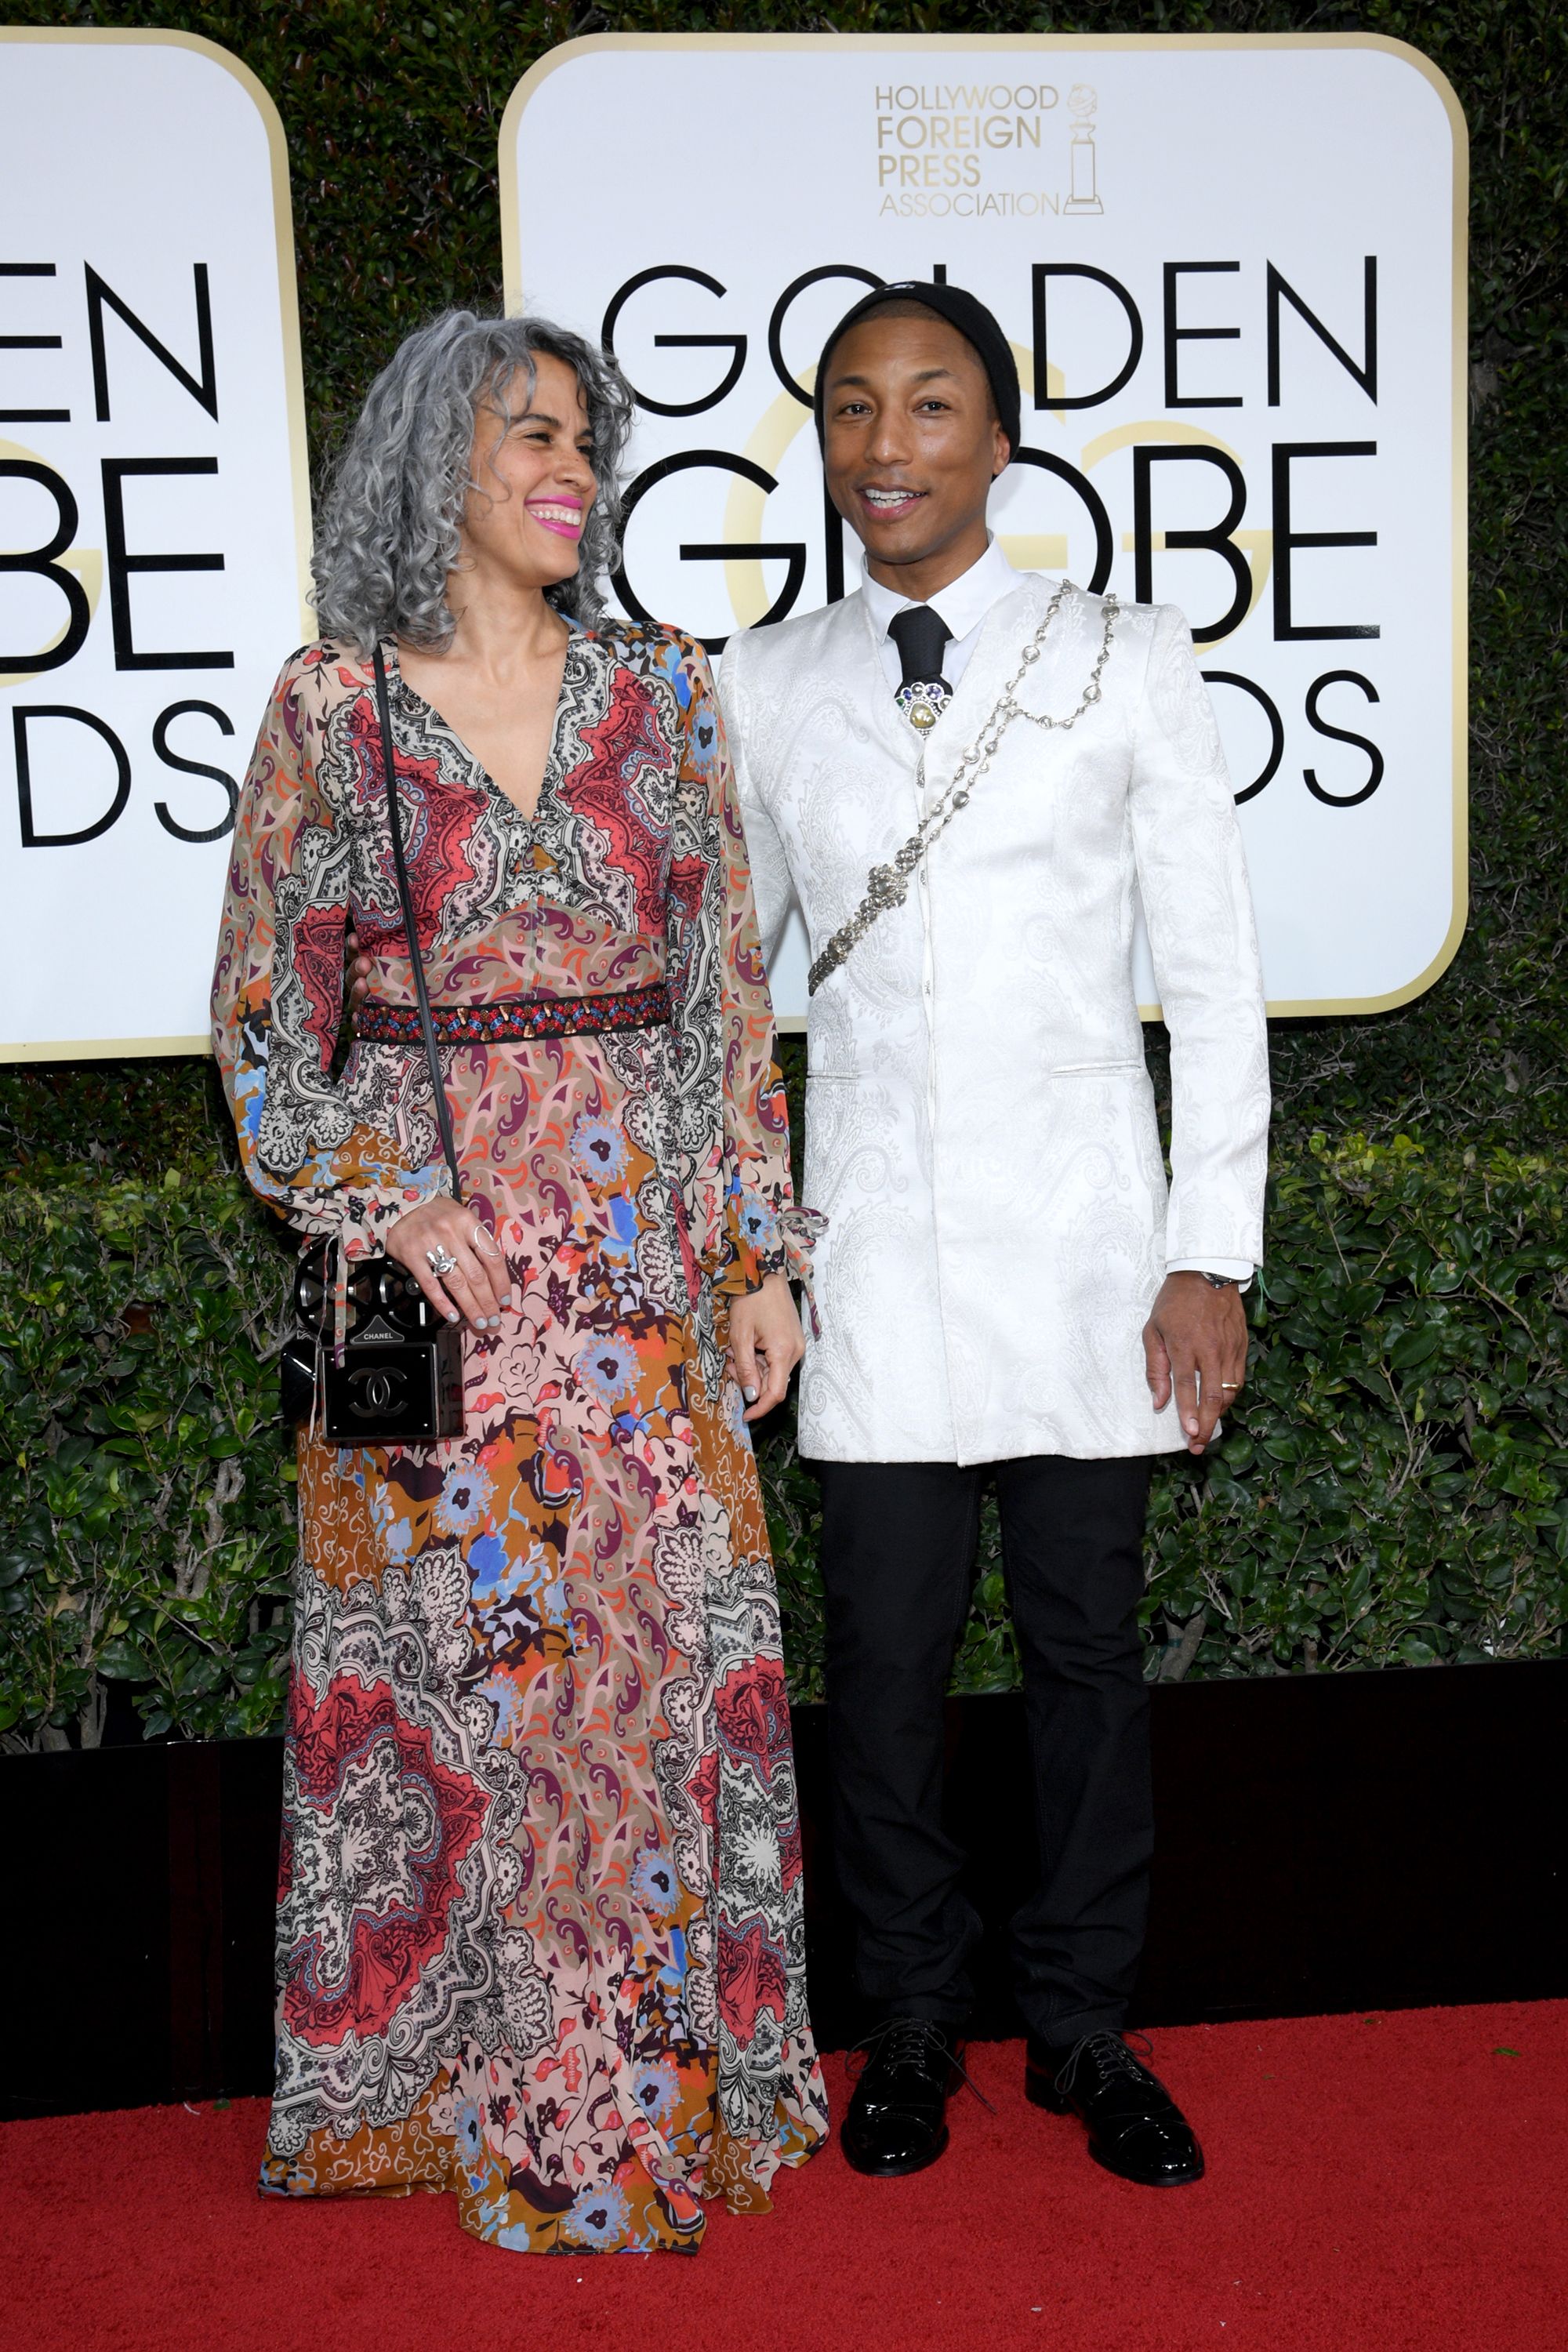 Pharrell Williams at the Golden Globes 2017 in Chanel